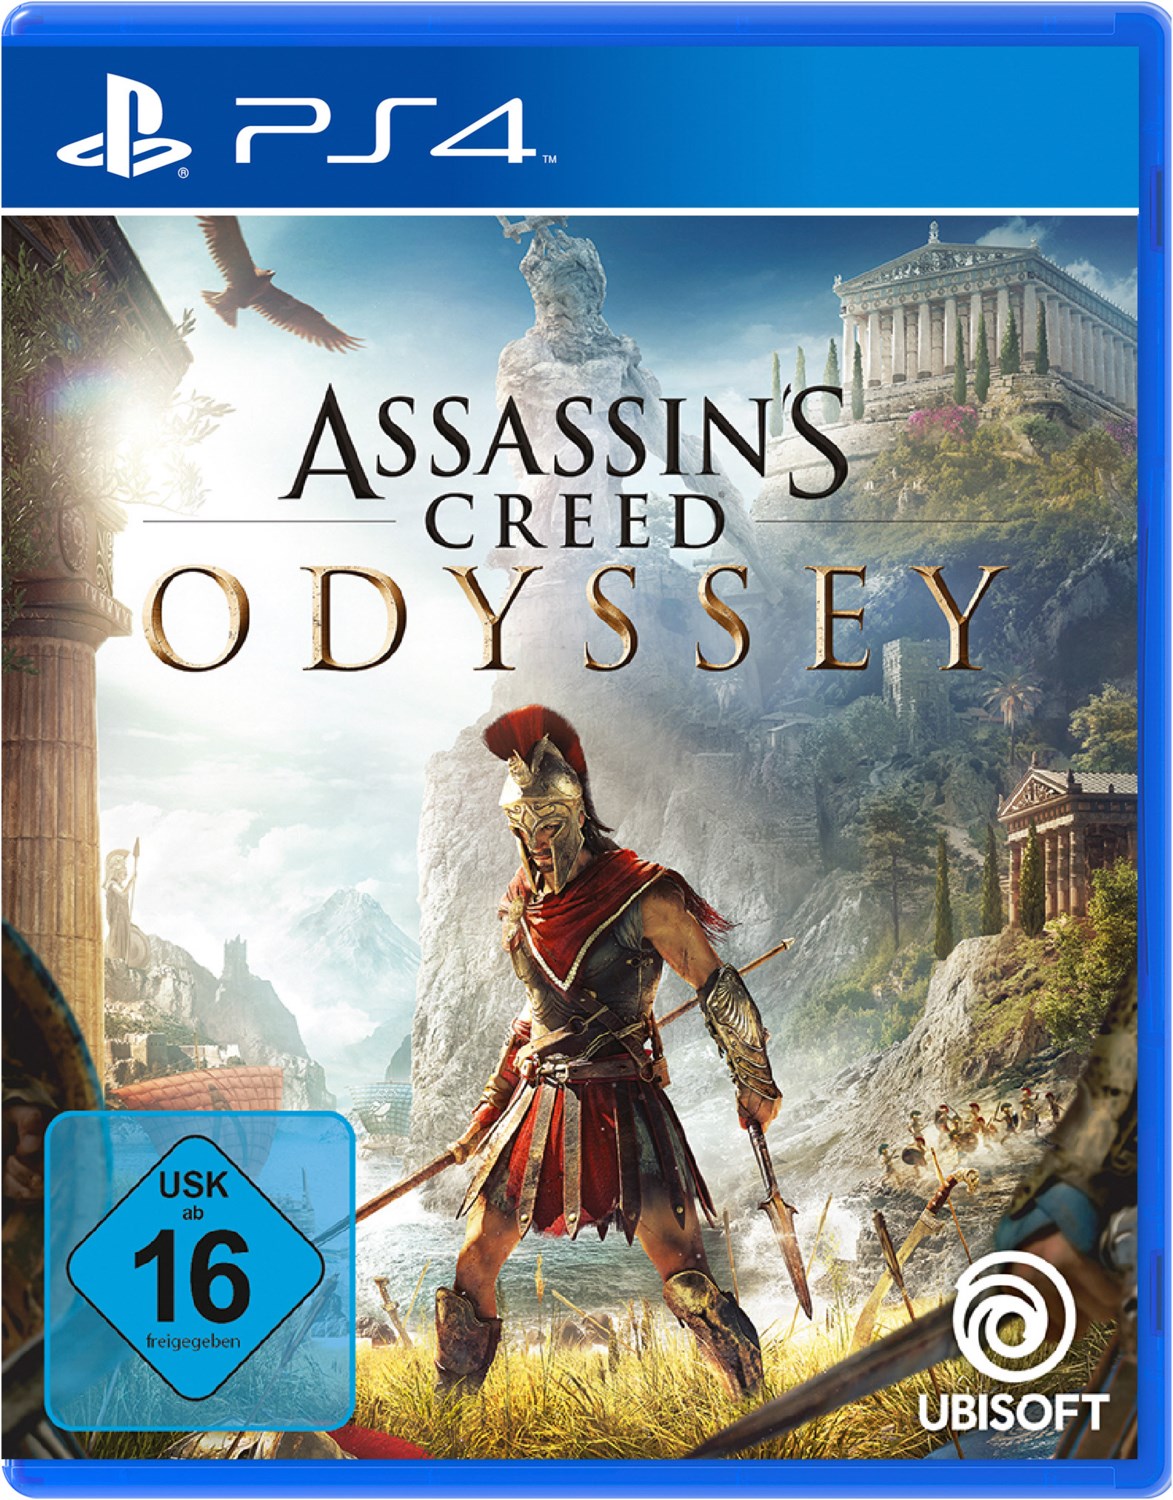 Software Pyramide PS4 Assassin's Creed Odyssey